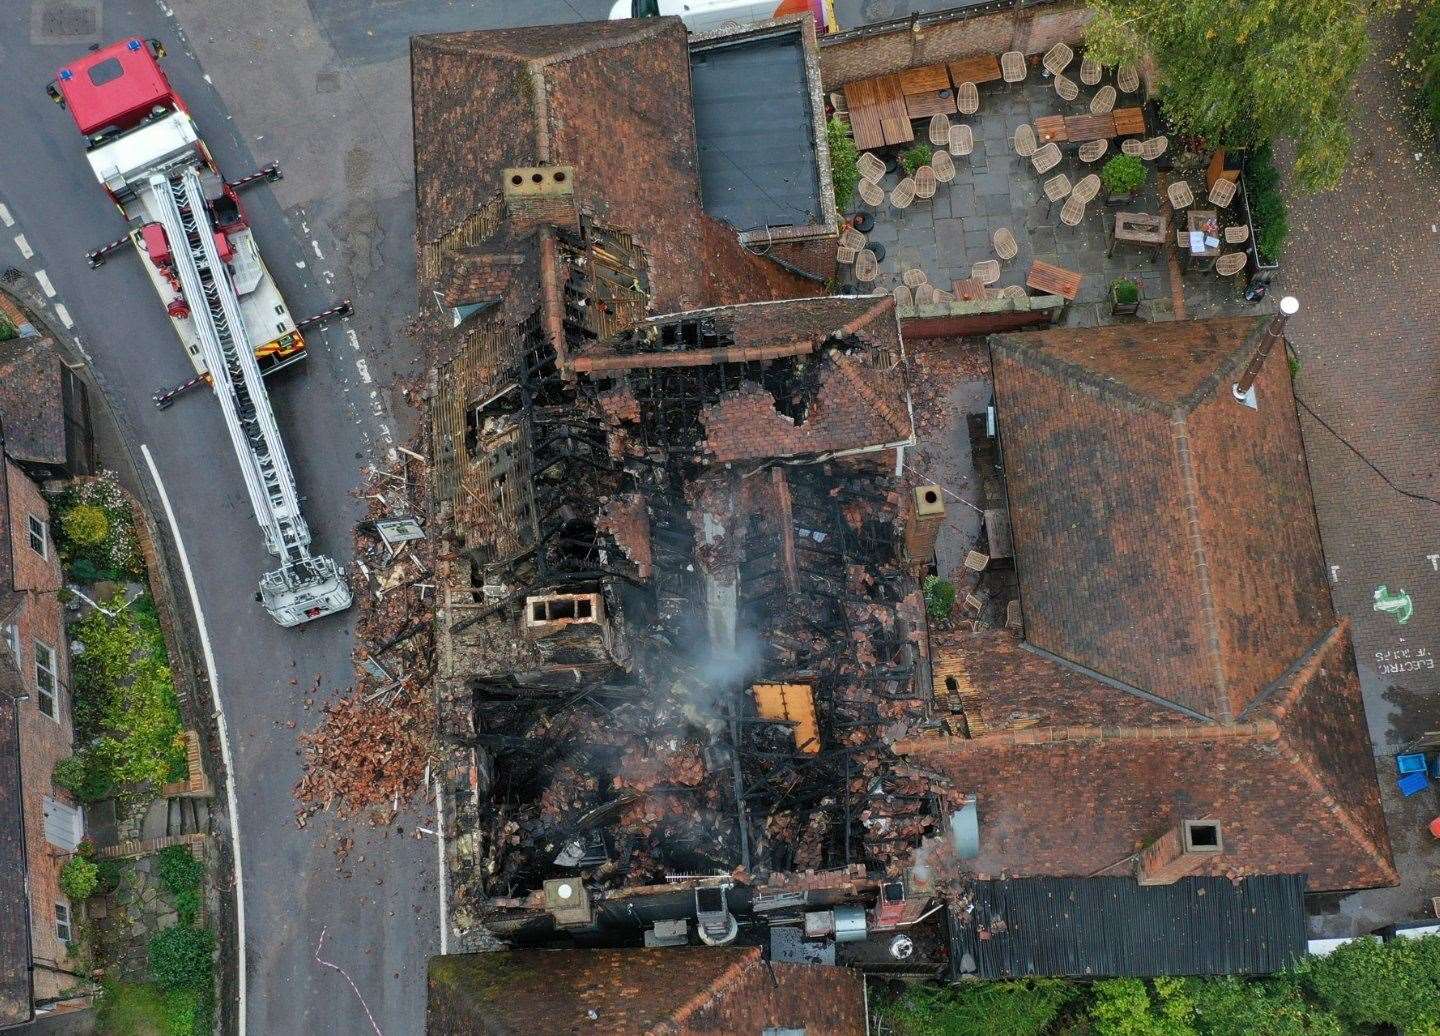 Drone pictures show the extent of the devastation after the fire at The Dirty Habit pub in Hollingbourne. Picture: UKNIP